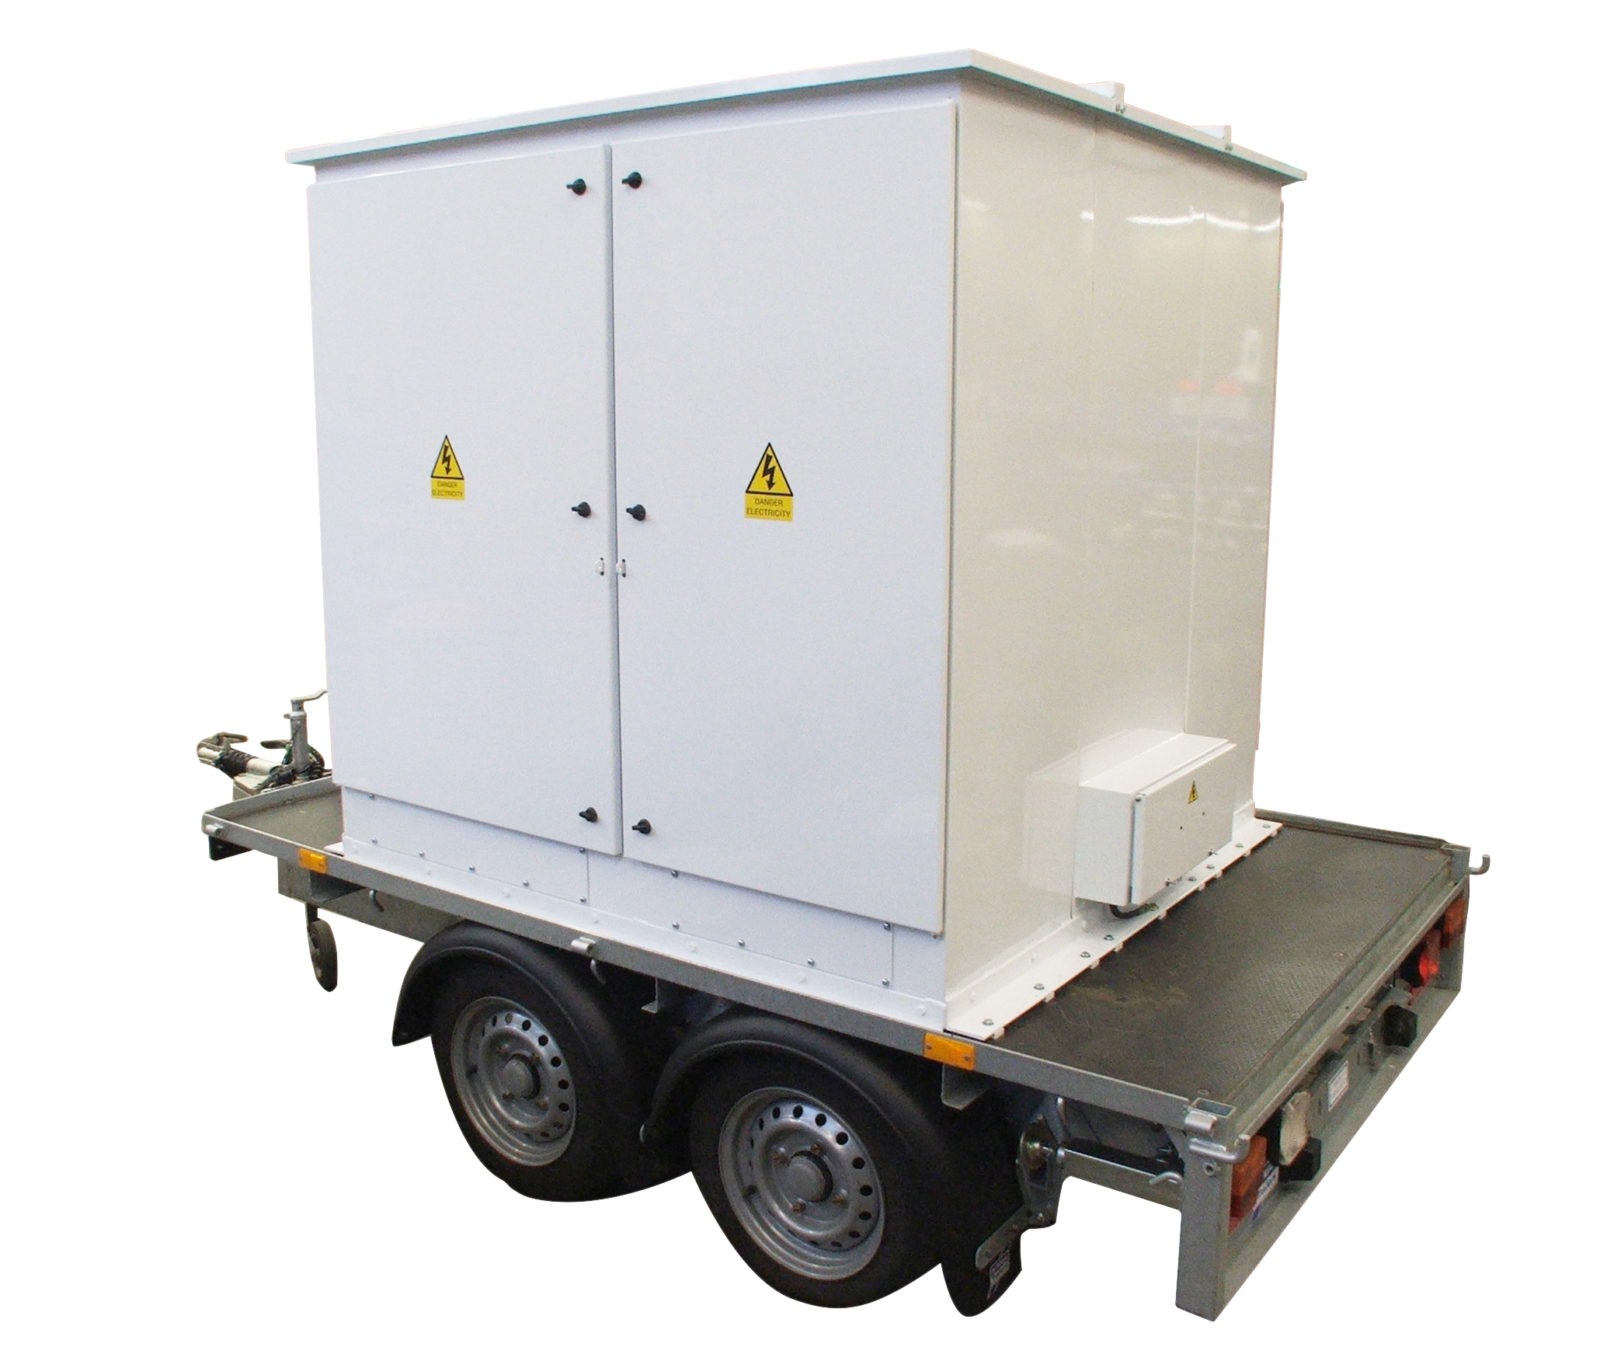 Trailer mounted distribution assembly